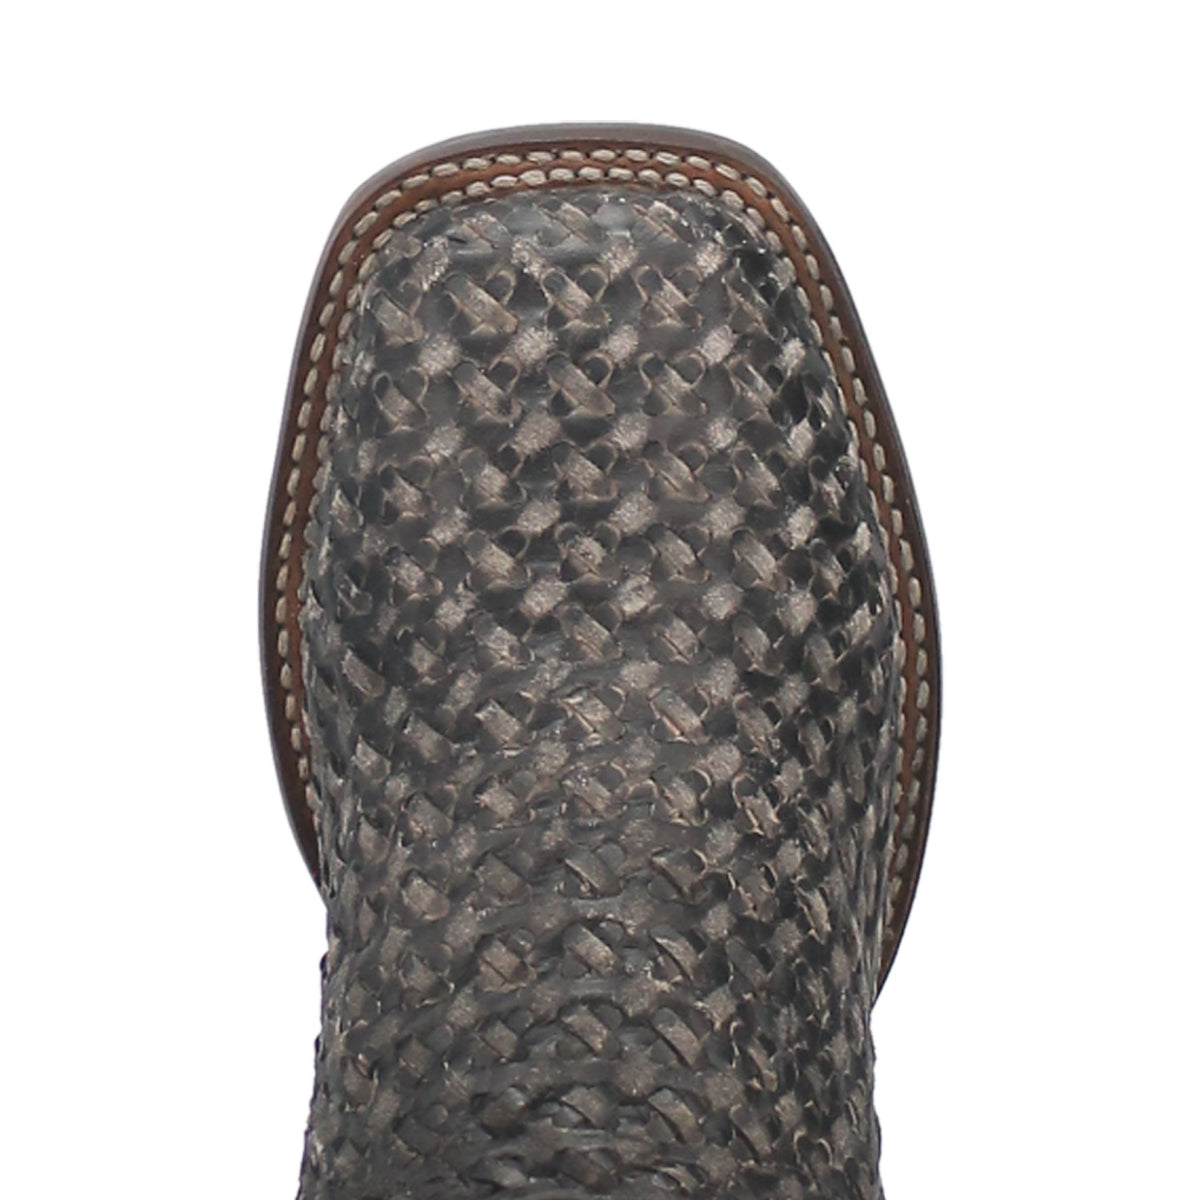 STANLEY LEATHER BOOT Cover